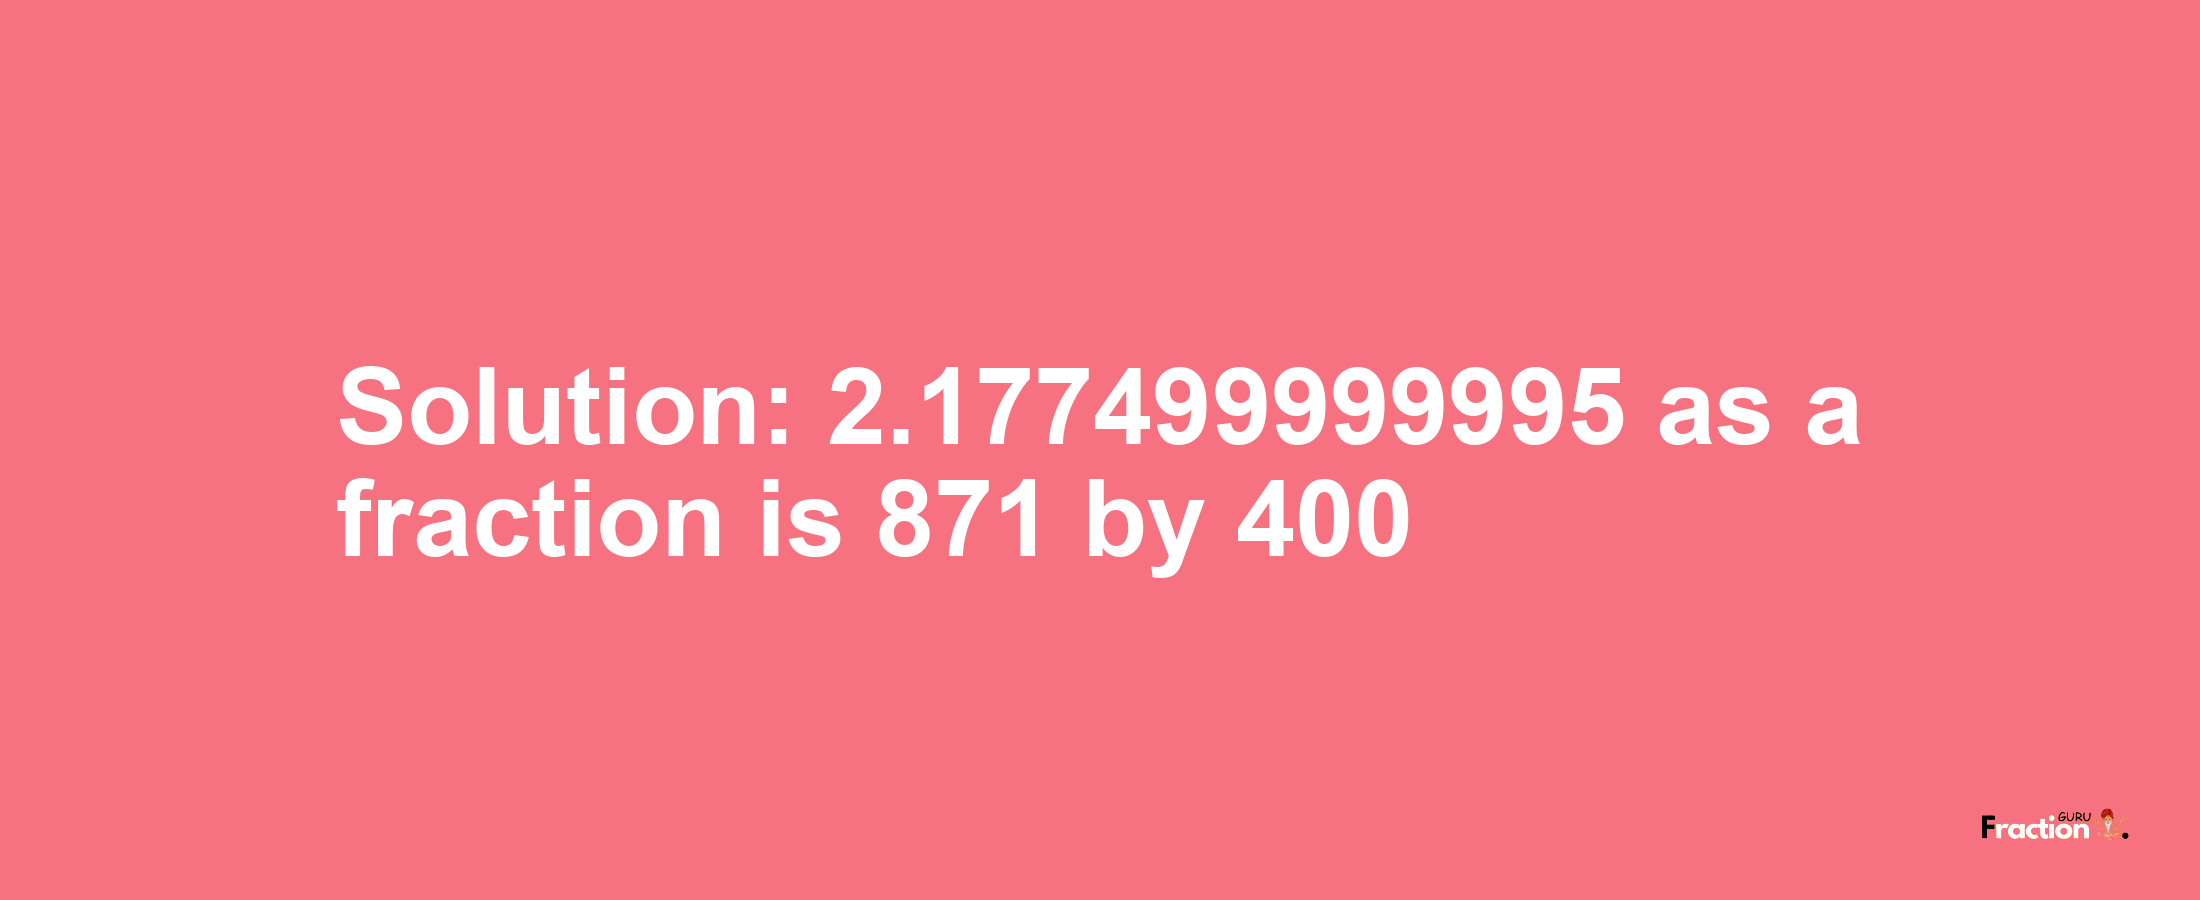 Solution:2.177499999995 as a fraction is 871/400